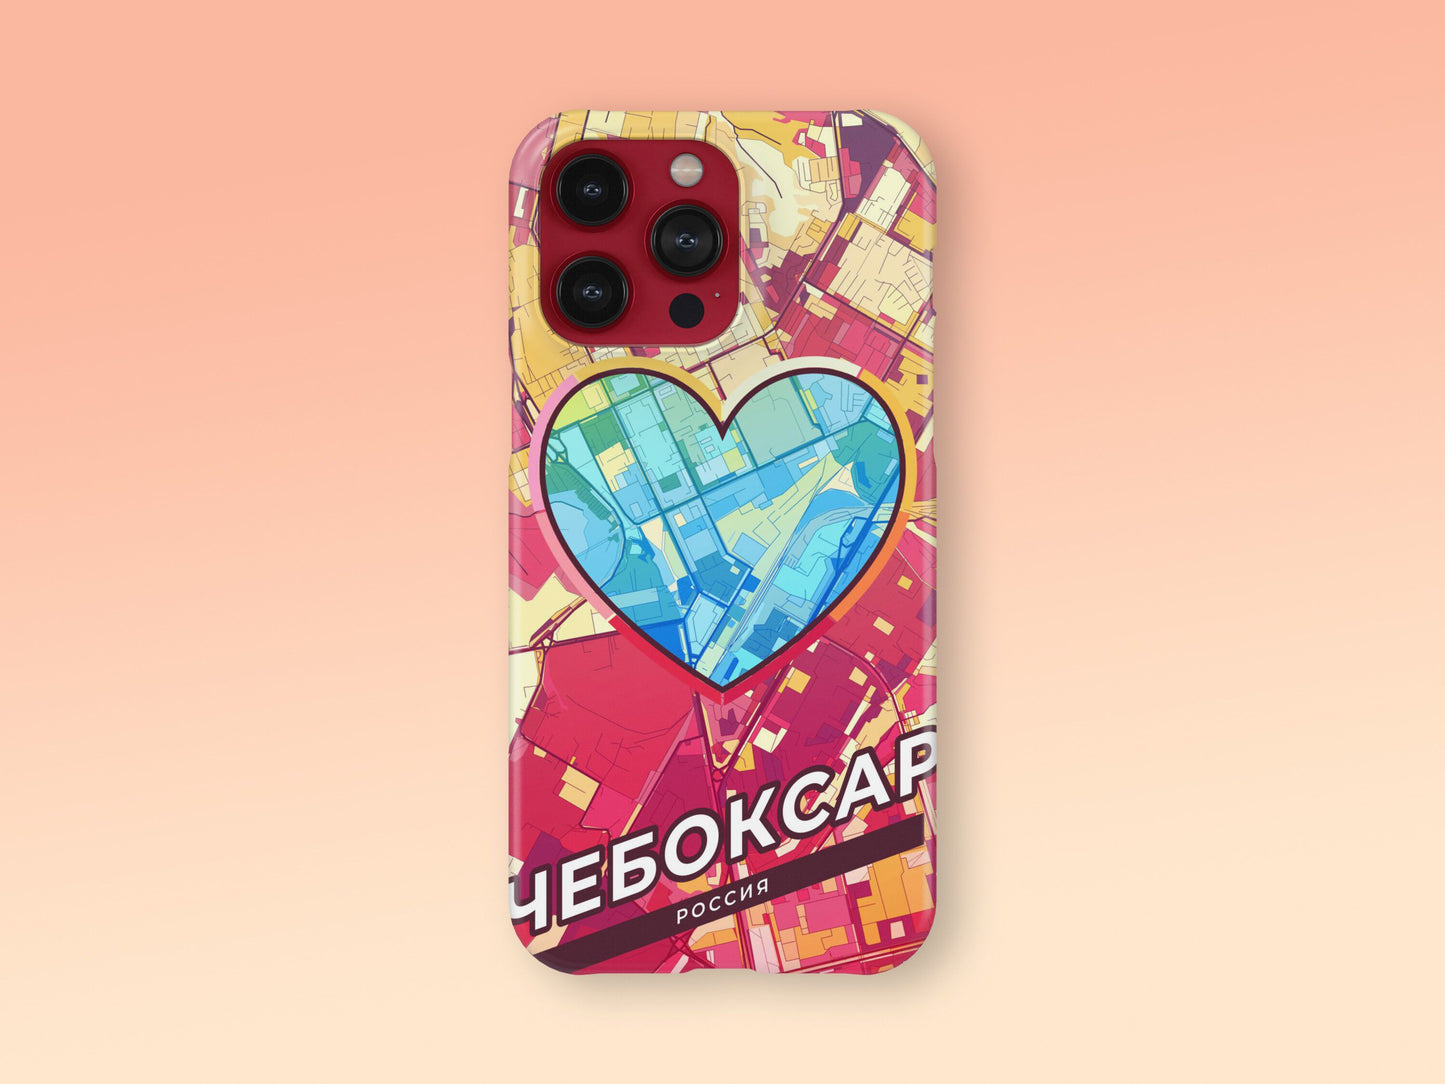 Cheboksary Russia slim phone case with colorful icon. Birthday, wedding or housewarming gift. Couple match cases. 2